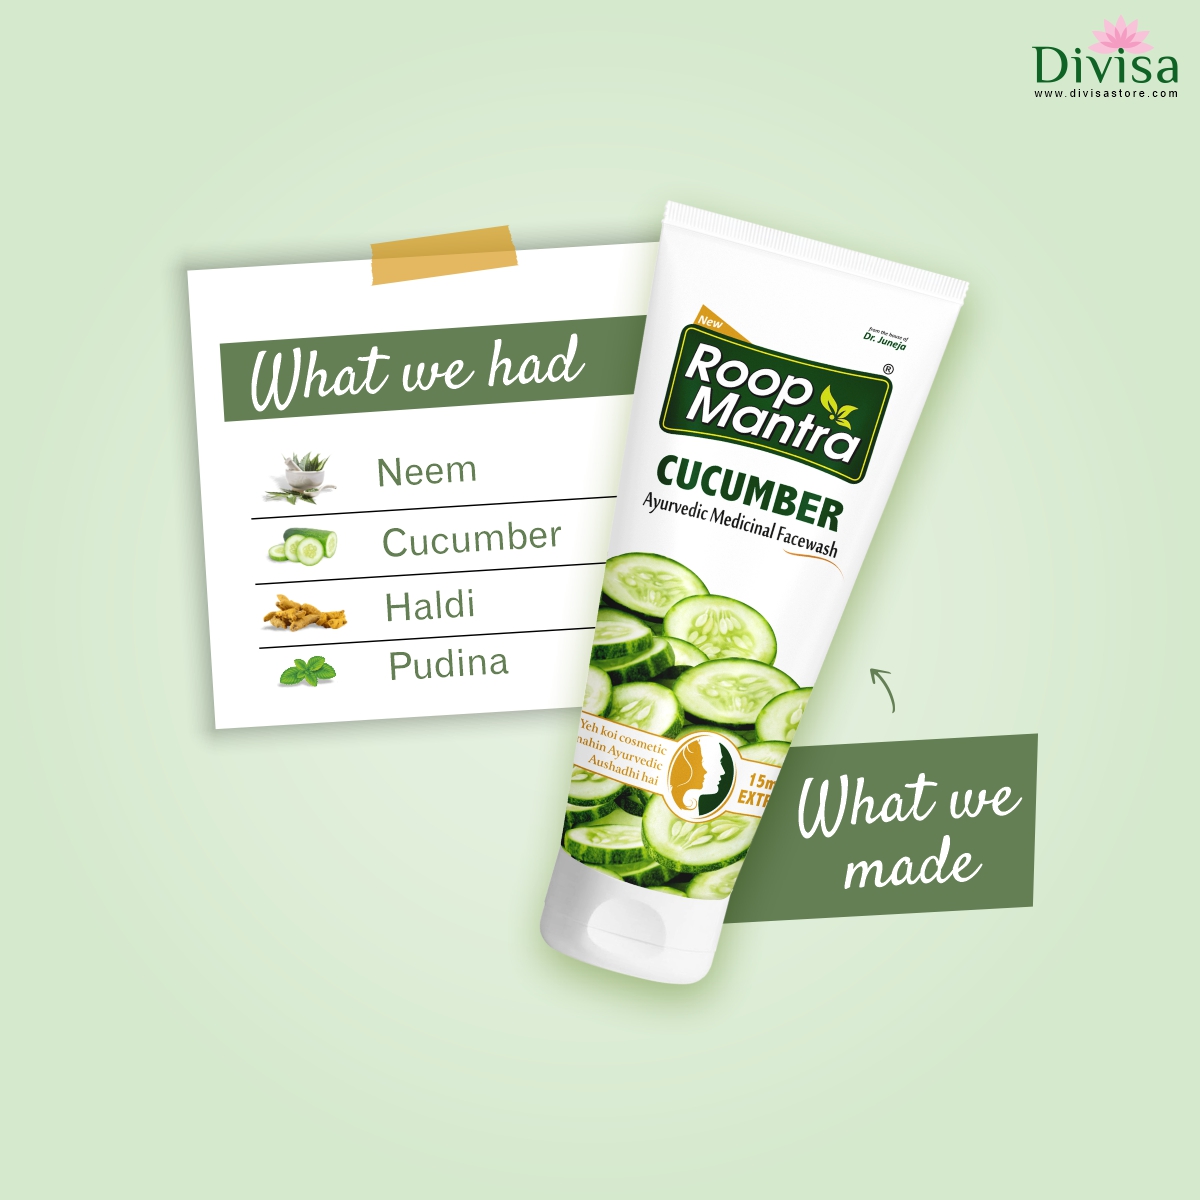 #RoopMantra Cucumber Face Wash is a blend of Ayurvedic herbs that helps to keep skin healthy and glowing. Using it for daily use is effective to maintain a better skin’s health.
#CarewithRoopMantra #DivisaStore #HerbalLifeHappyLife 
Visit us Today: divisastore.com